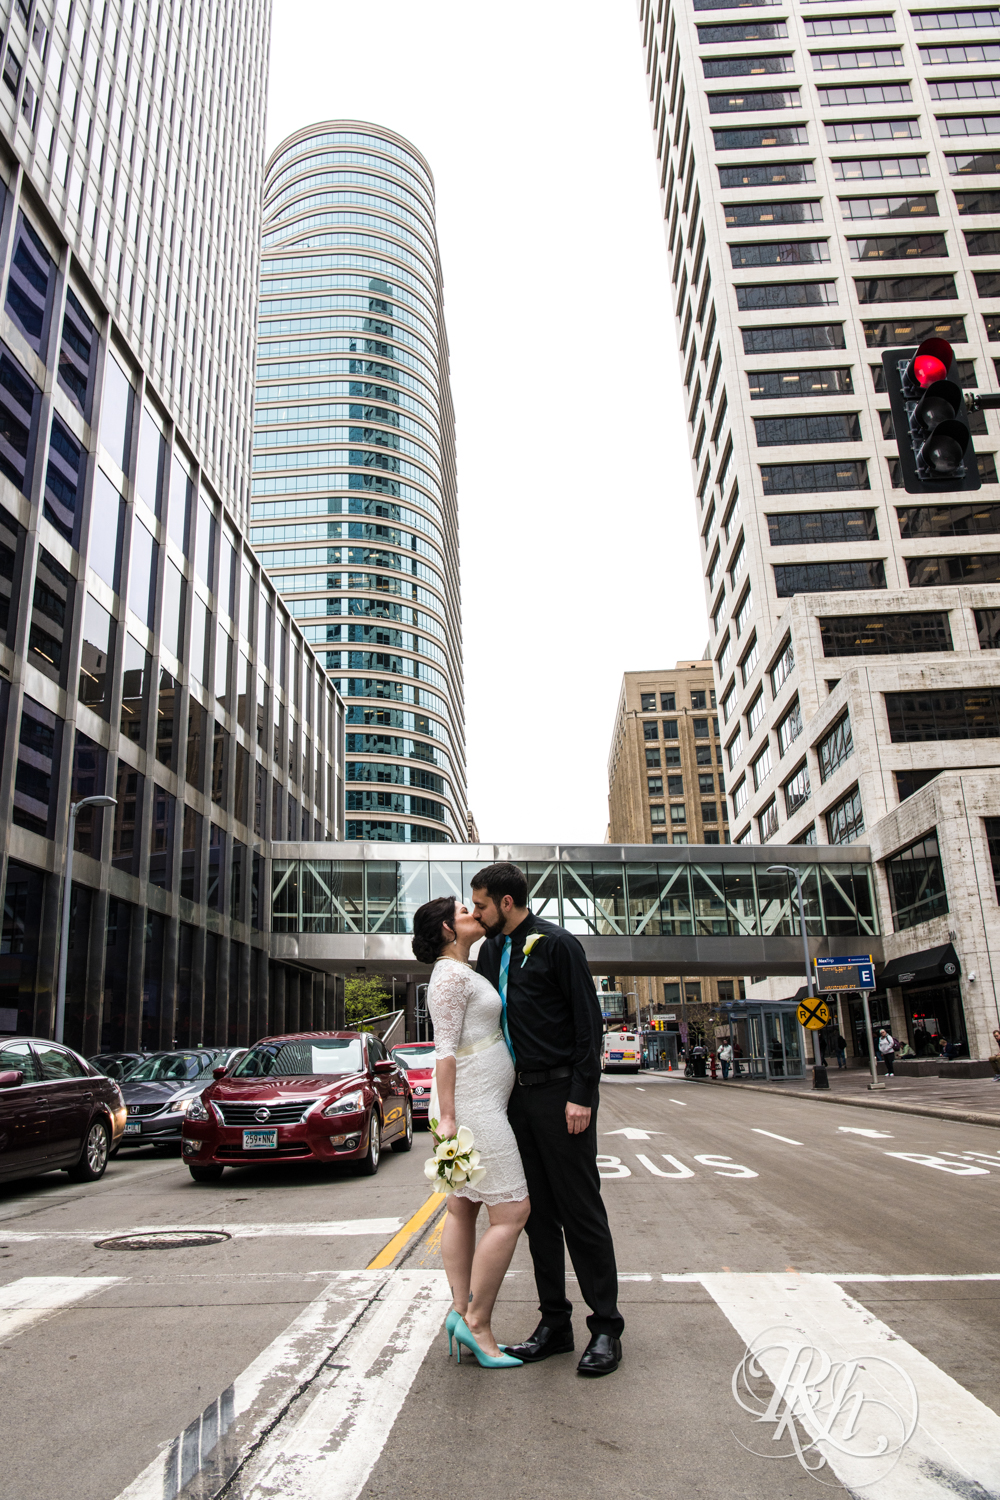 Bride and groom kiss in Minneapolis, Minnesota before their courthouse wedding.